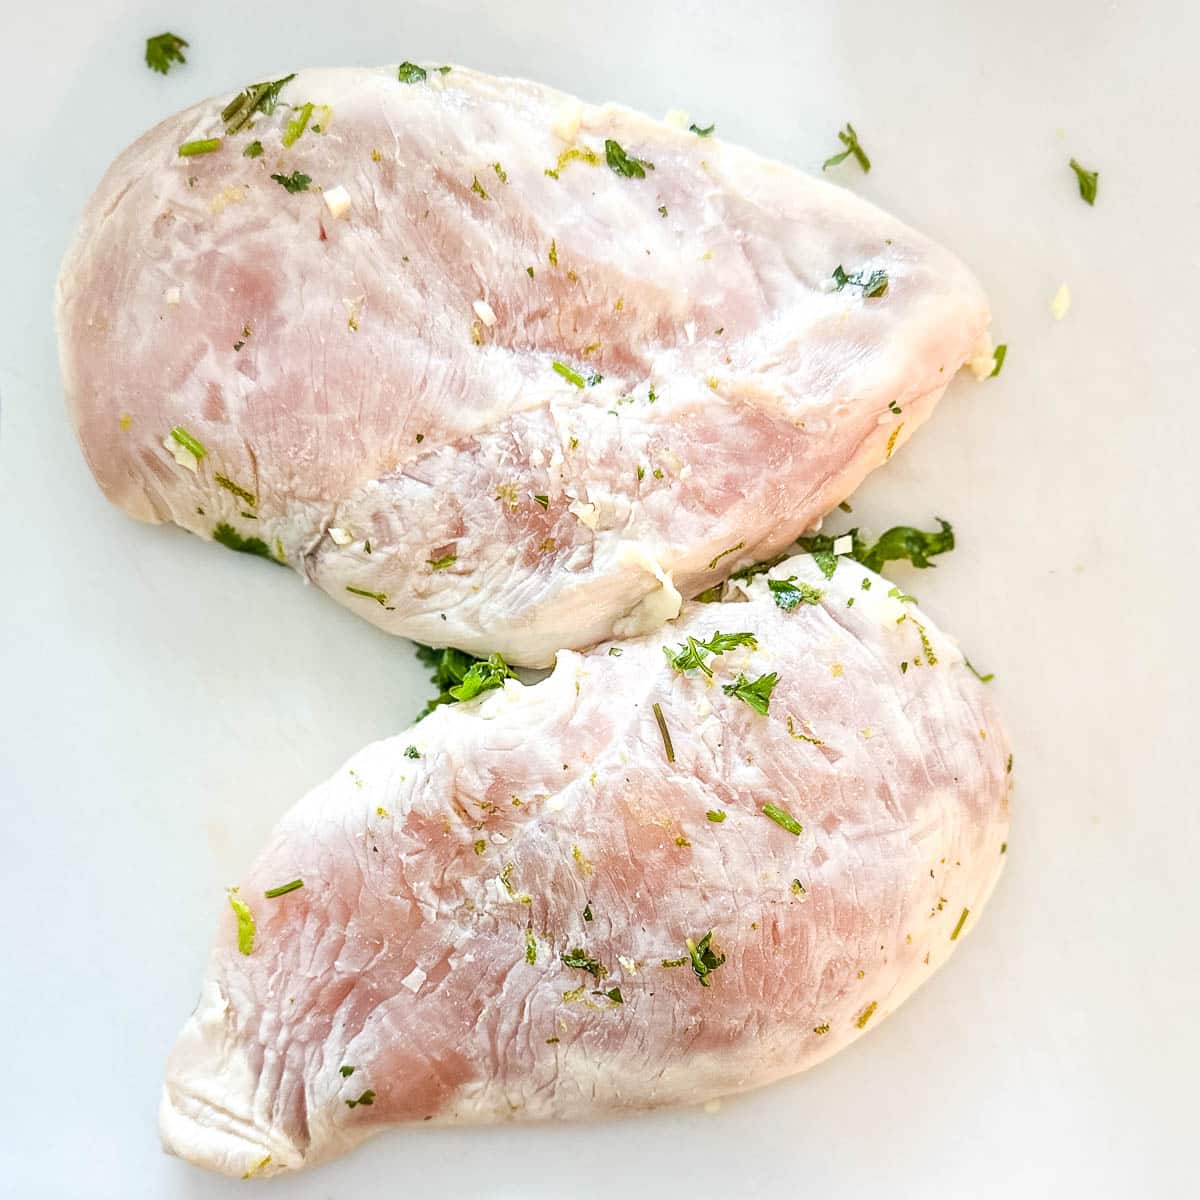 Raw marinated chicken on a white cutting board.